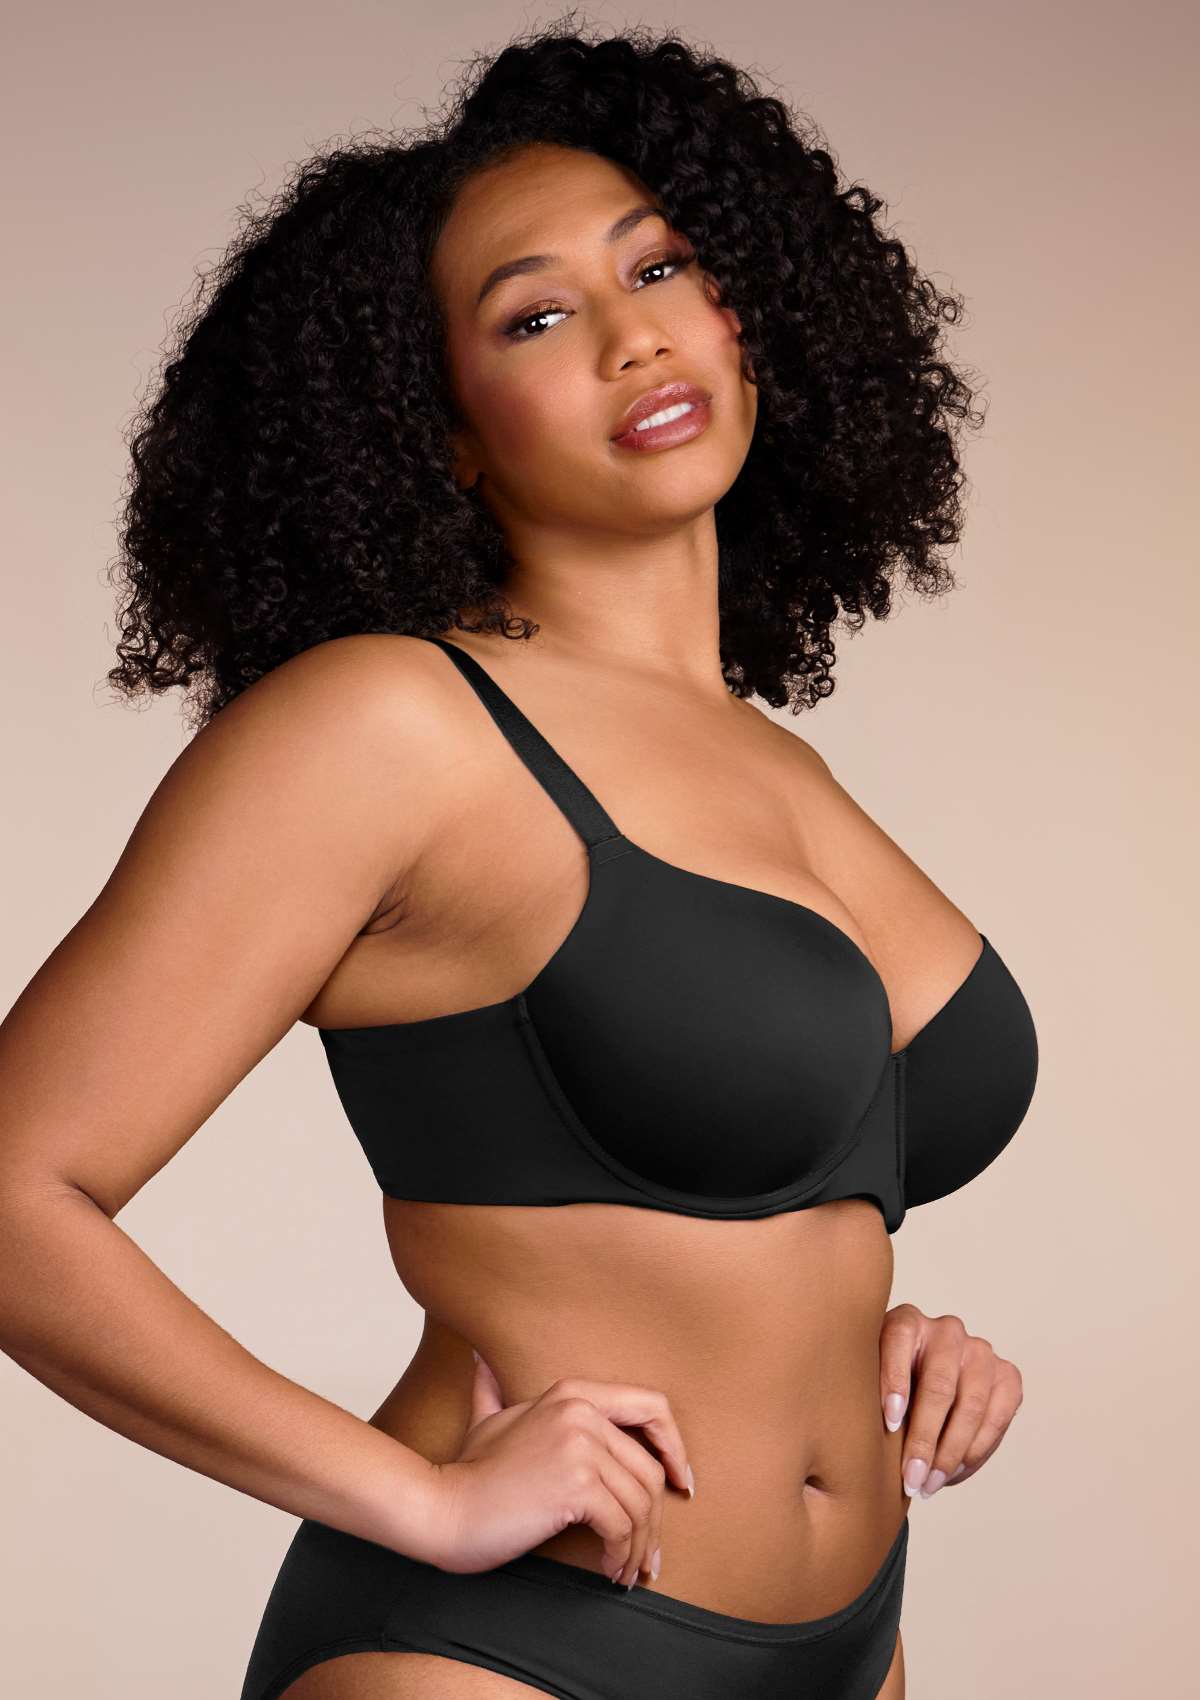 HSIA Gemma Smooth Padded T-shirt Everyday Bras - For Lift And Comfort - Black / 38 / DDD/F